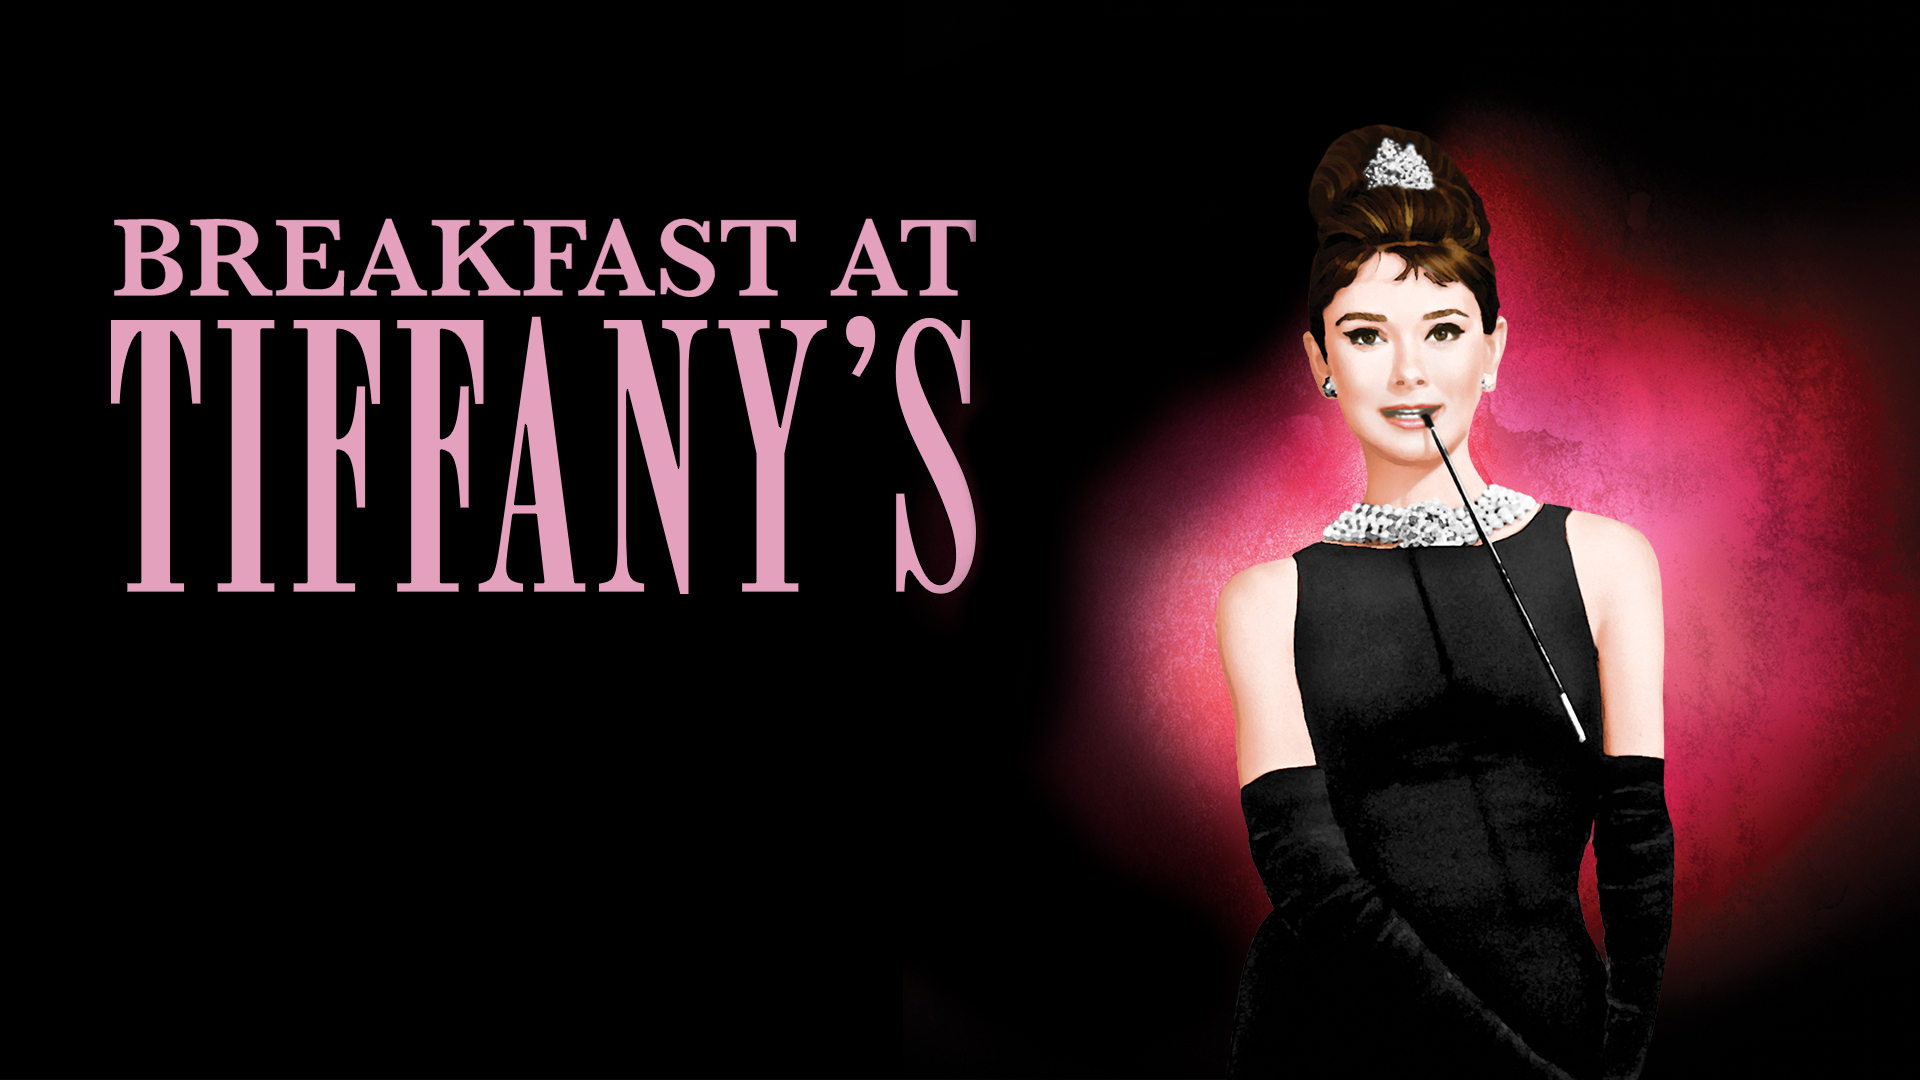 45-facts-about-the-movie-breakfast-at-tiffanys